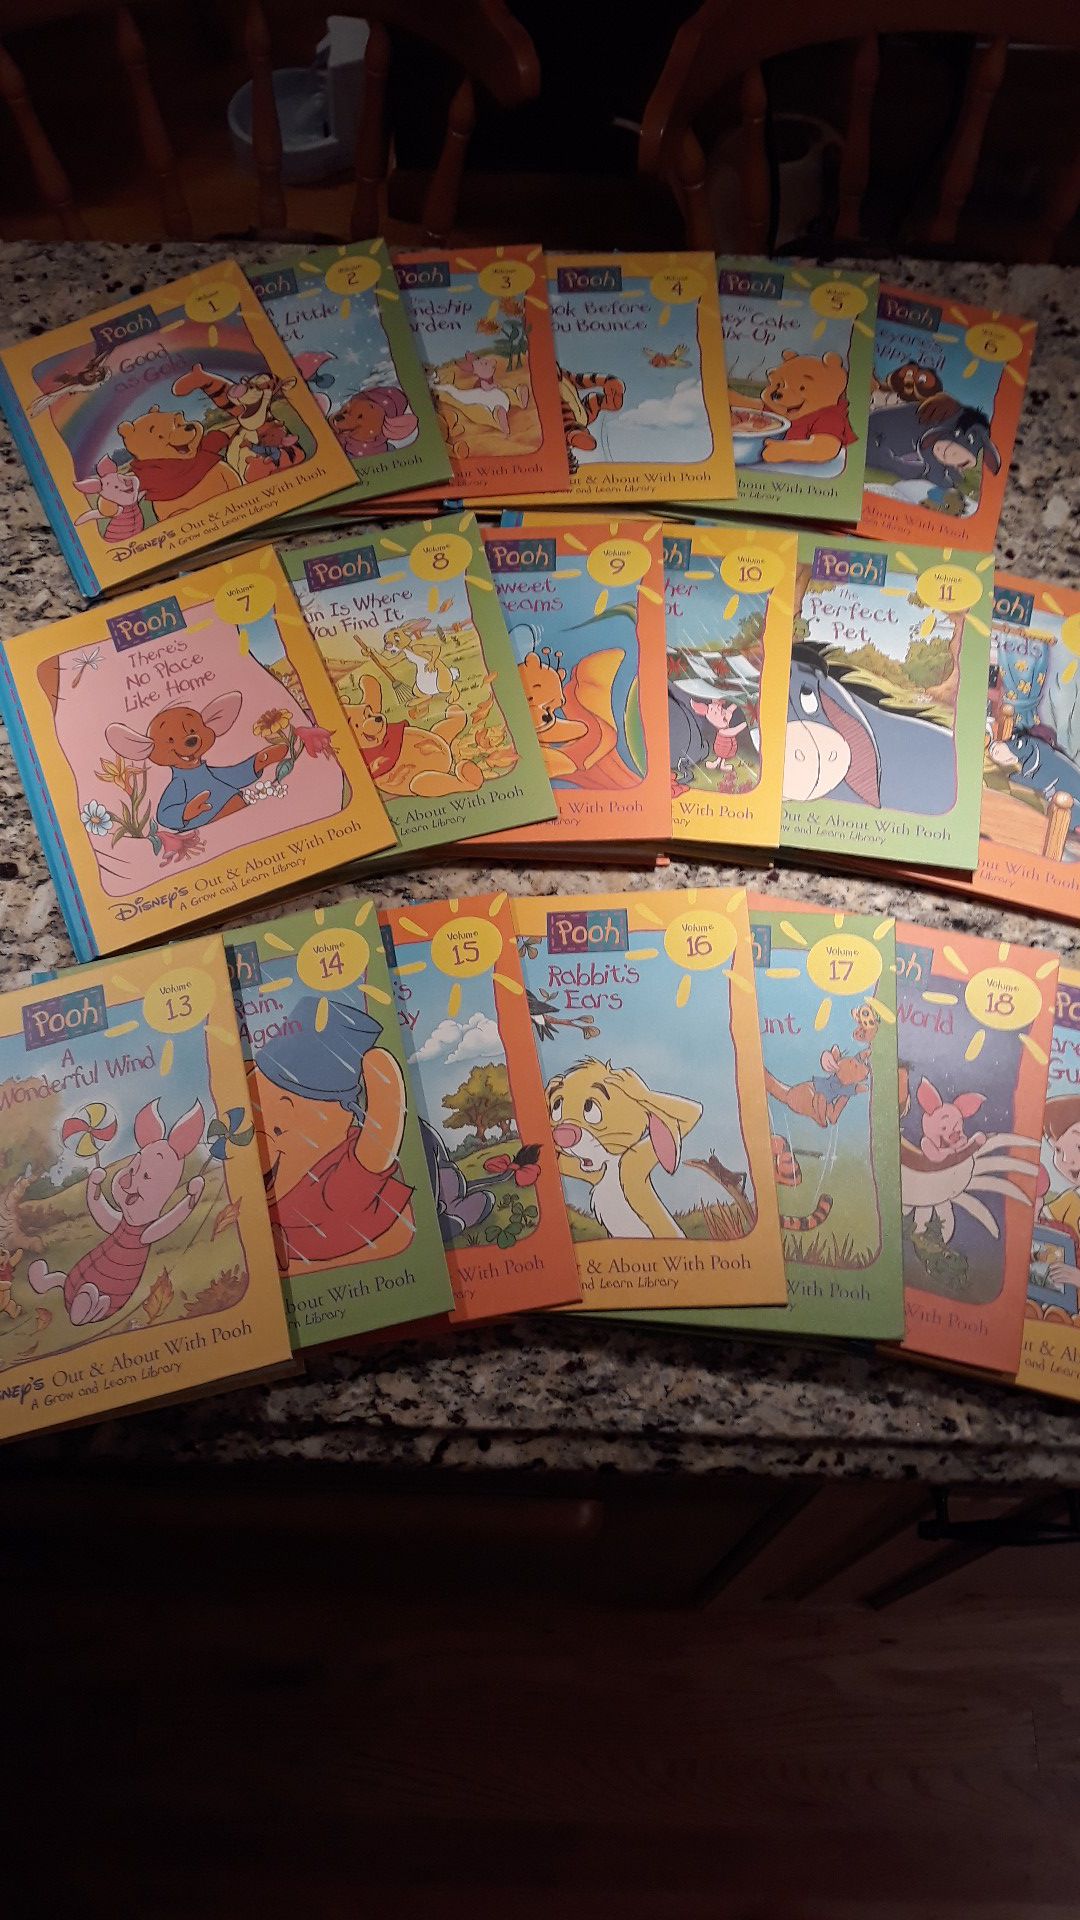 Complete set of Grow and Learn Disney's "Pooh" volumes 1 thru 19